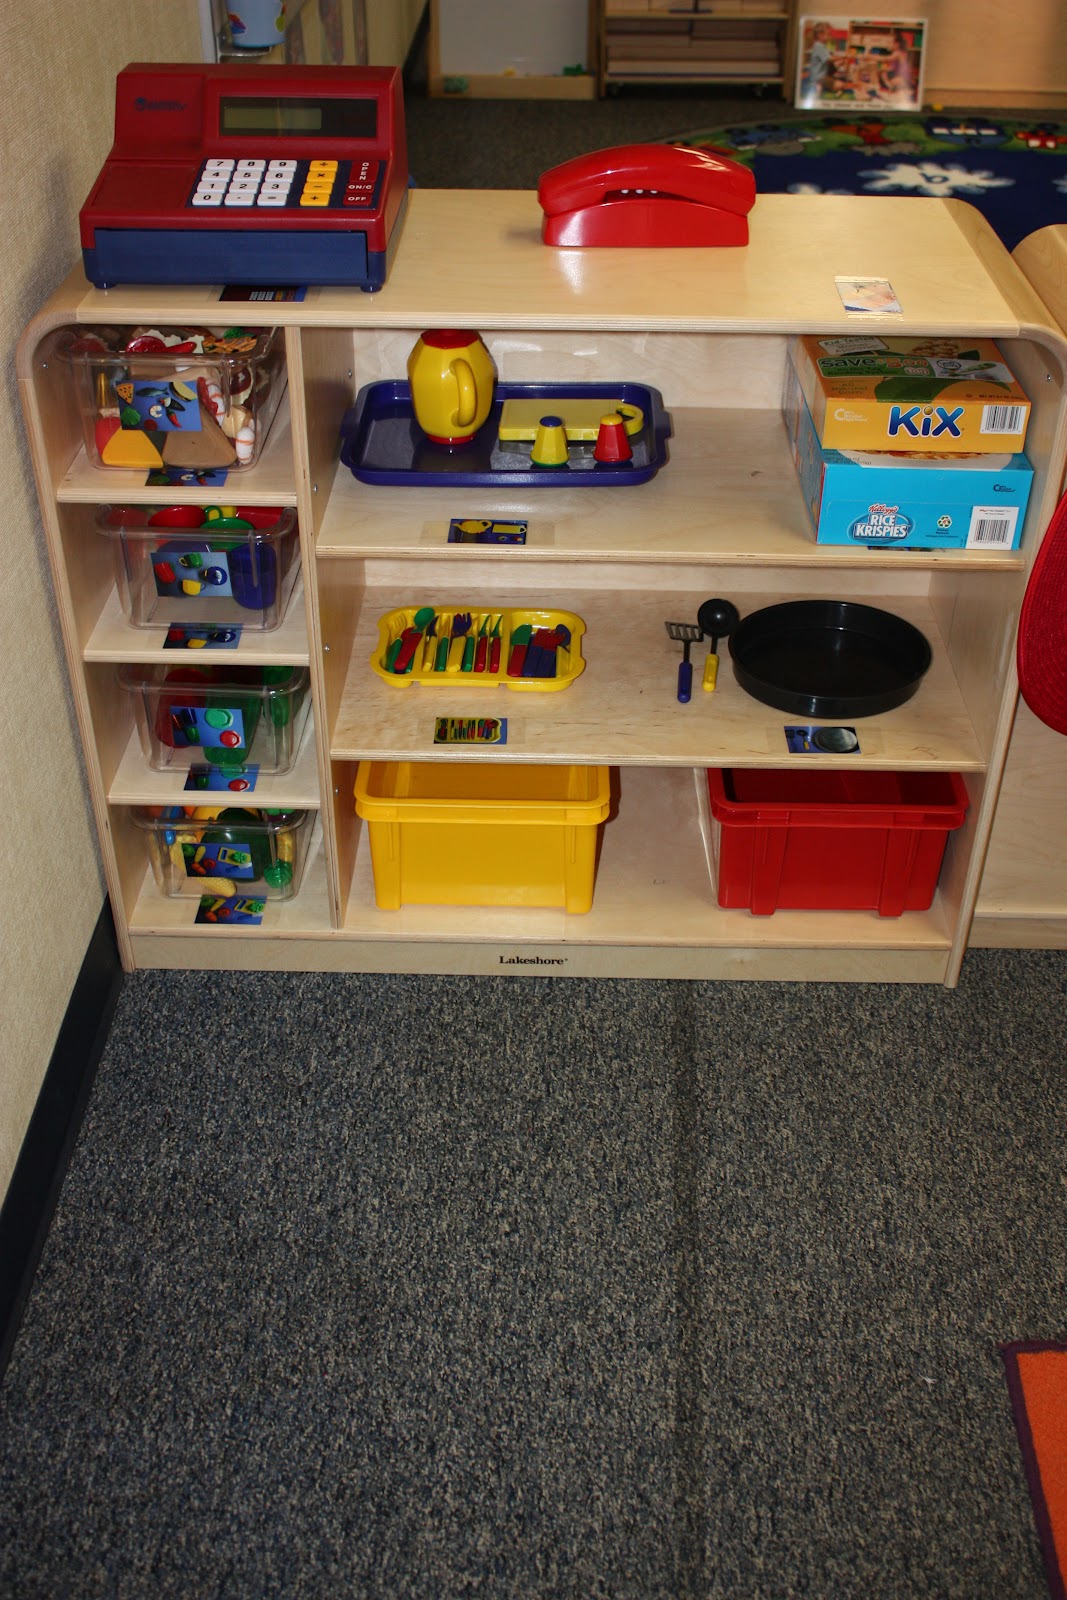 What kind of layout should a preschool classroom have?